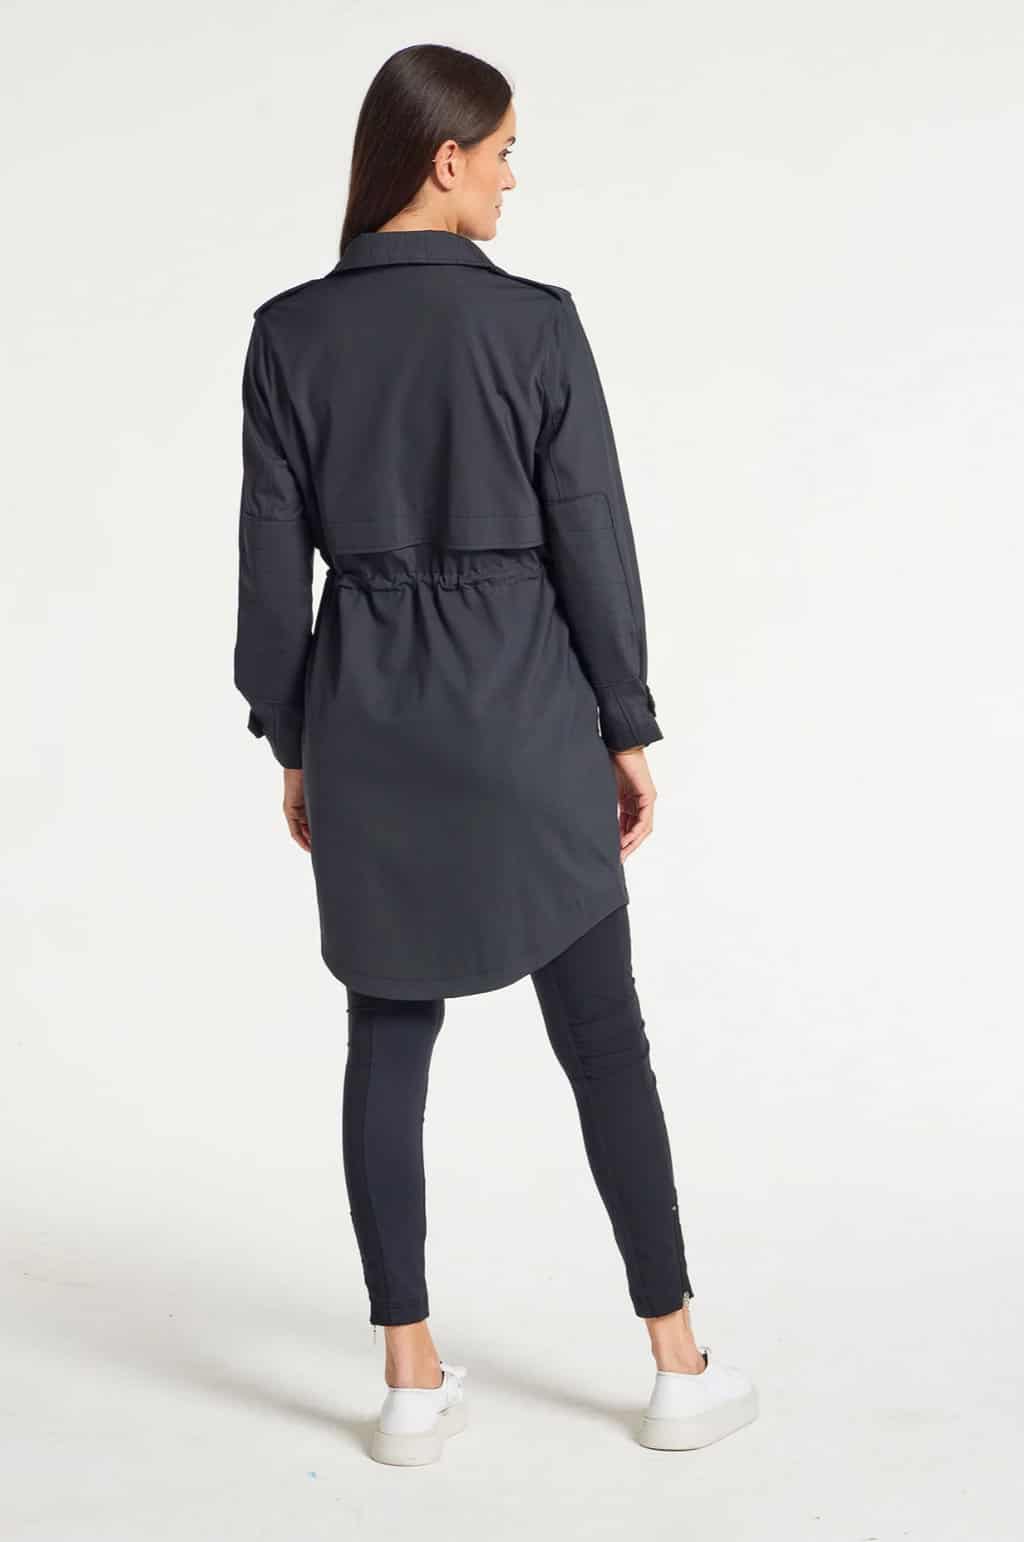 Back of a woman with dark hair modelling a travel trench coat.